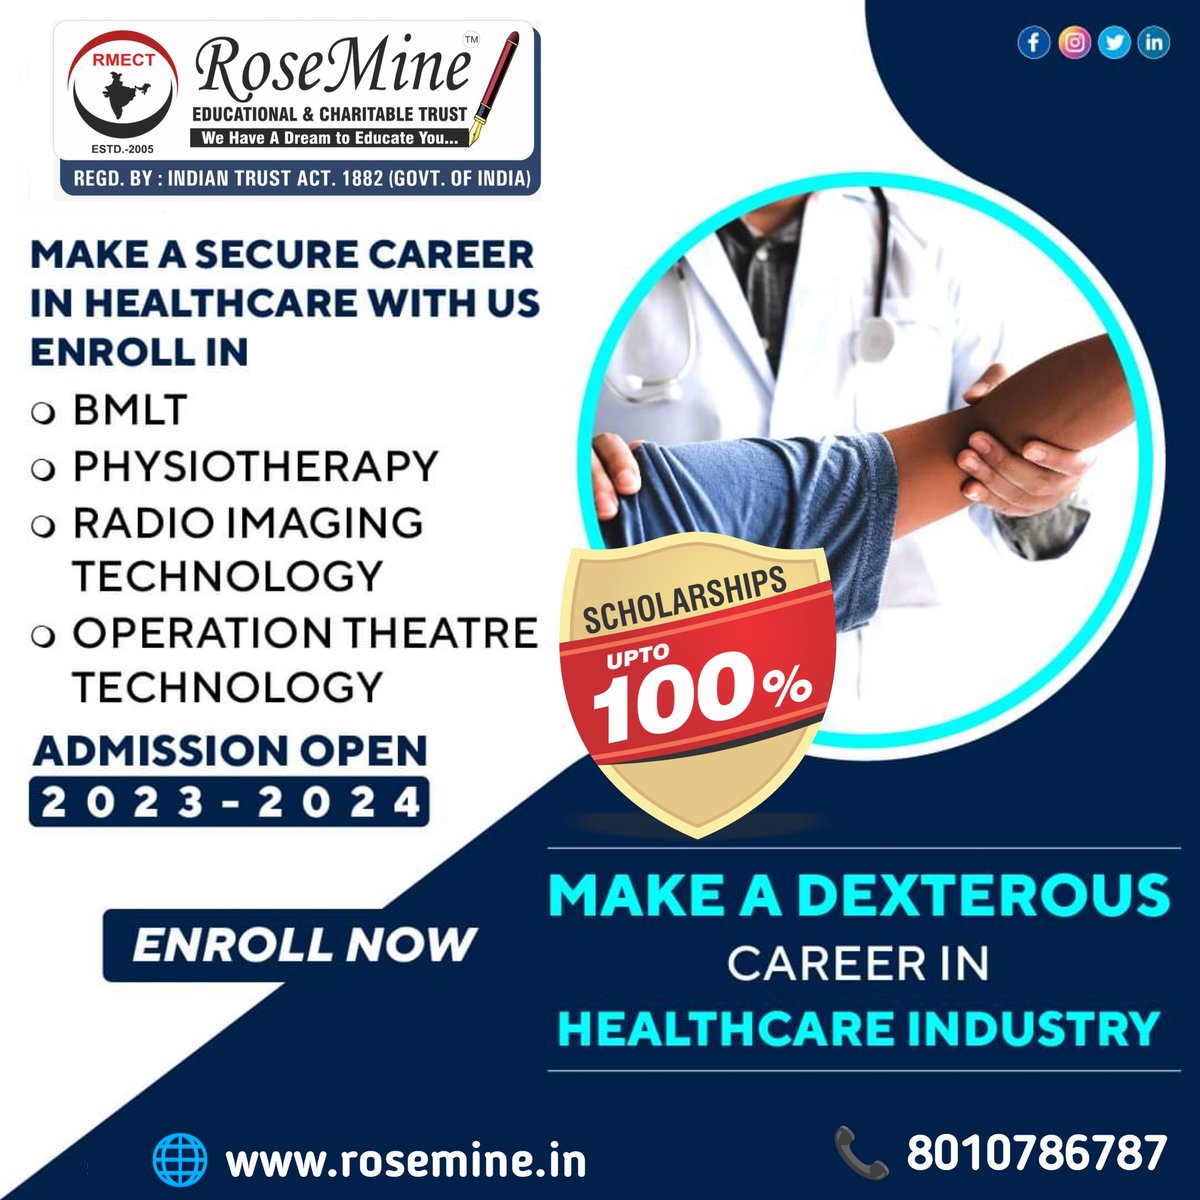 𝐀𝐝𝐦𝐢𝐬𝐬𝐢𝐨𝐧 𝐎𝐩𝐞𝐧!
Upto 100% Scholarship
Join Our Scholarship Program 'Mission Sankalp'
For More Info 📞Call Us Now:- 8010786787
🌐rosemine.in

 #operationtheatretechnician #surgicaltechnology #healthcareprofessional #paramedicalcourses #paramedicalcollege